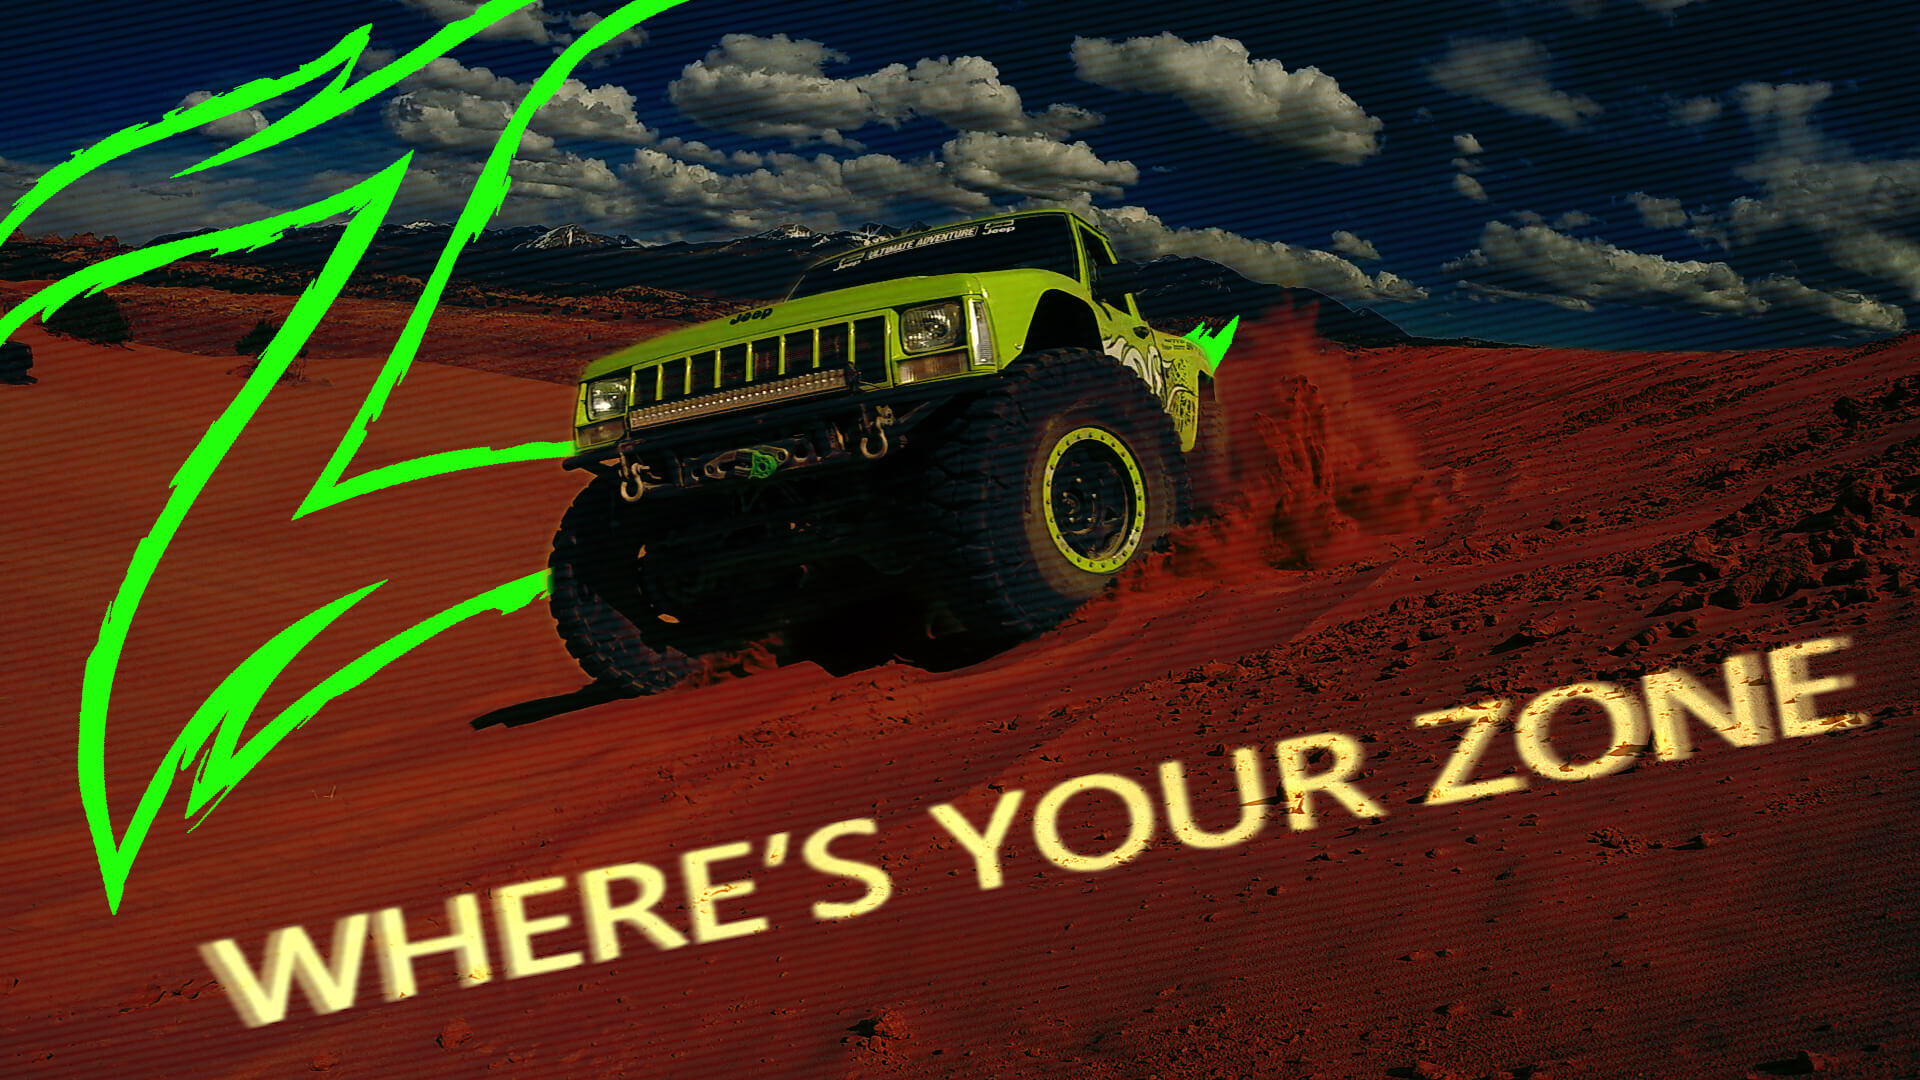 Where's Your Zone